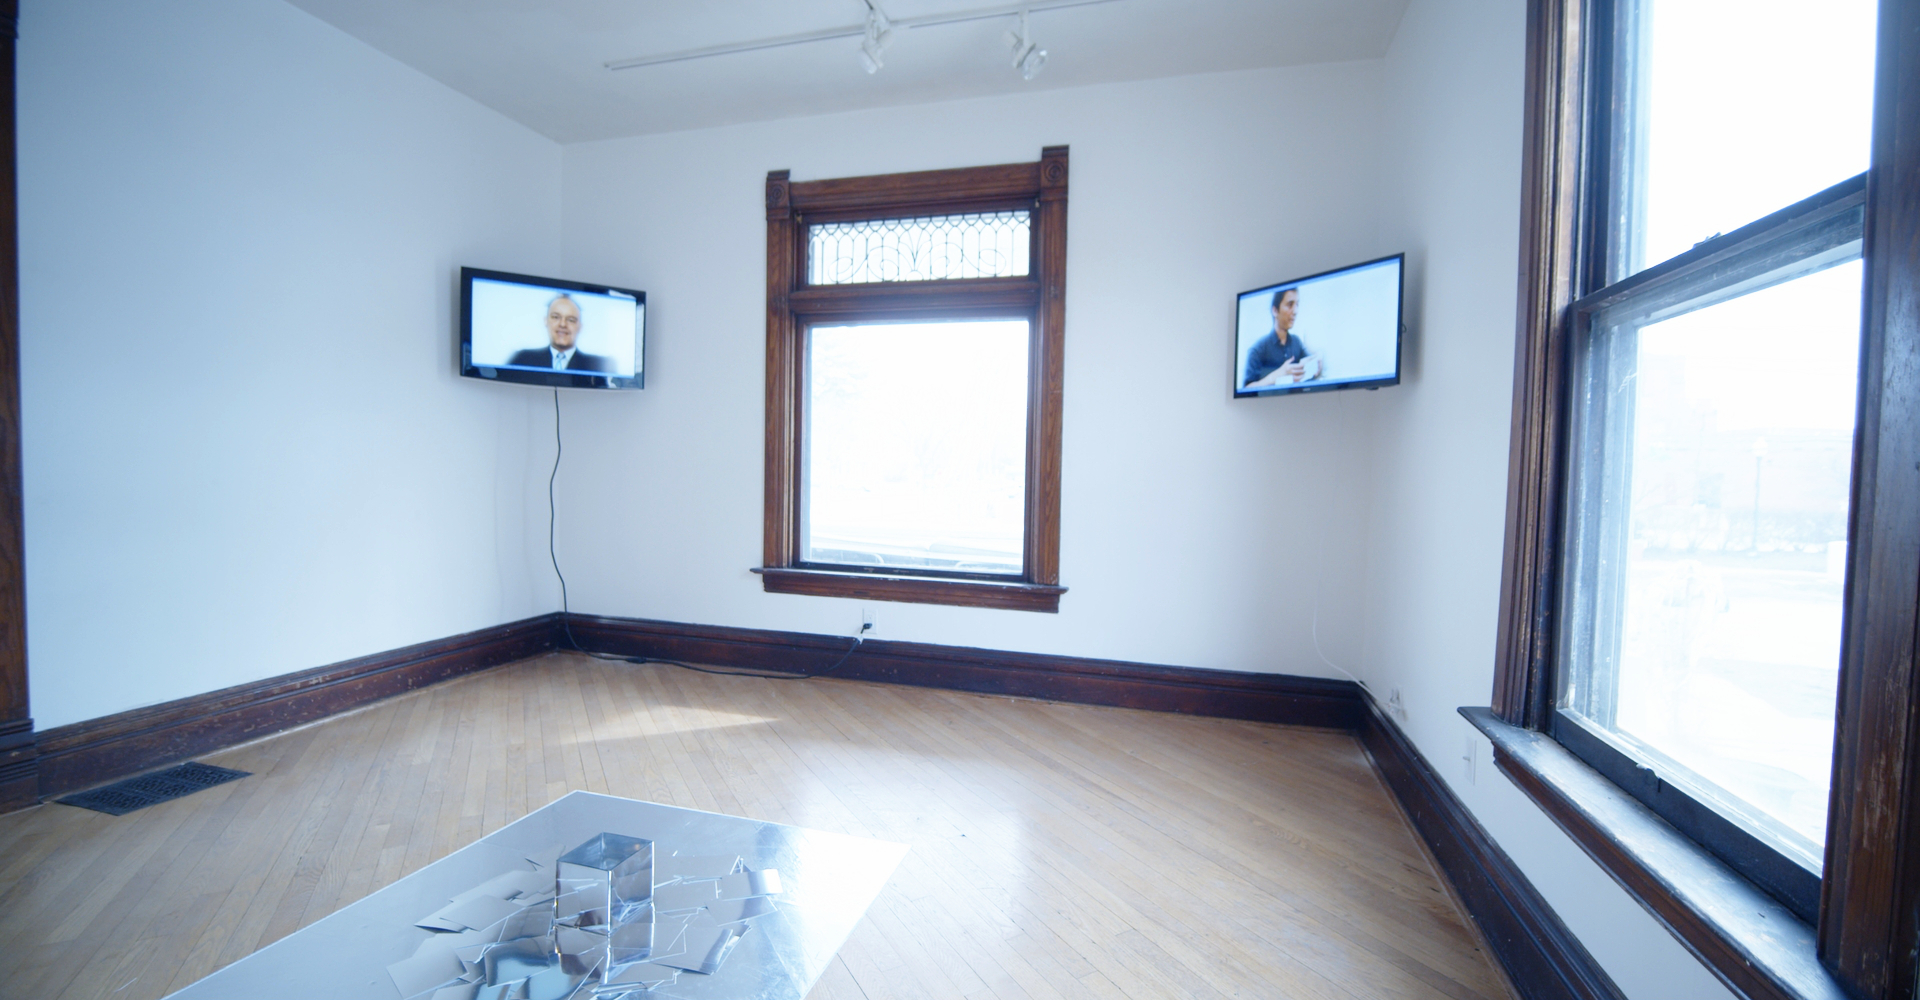 <i>Instruction</i> (2023). Installation view. <a href=https://www.publicspaceone.com/events/terminal-care target=_blank>Terminal Care</a>, Public Space One. 2023.